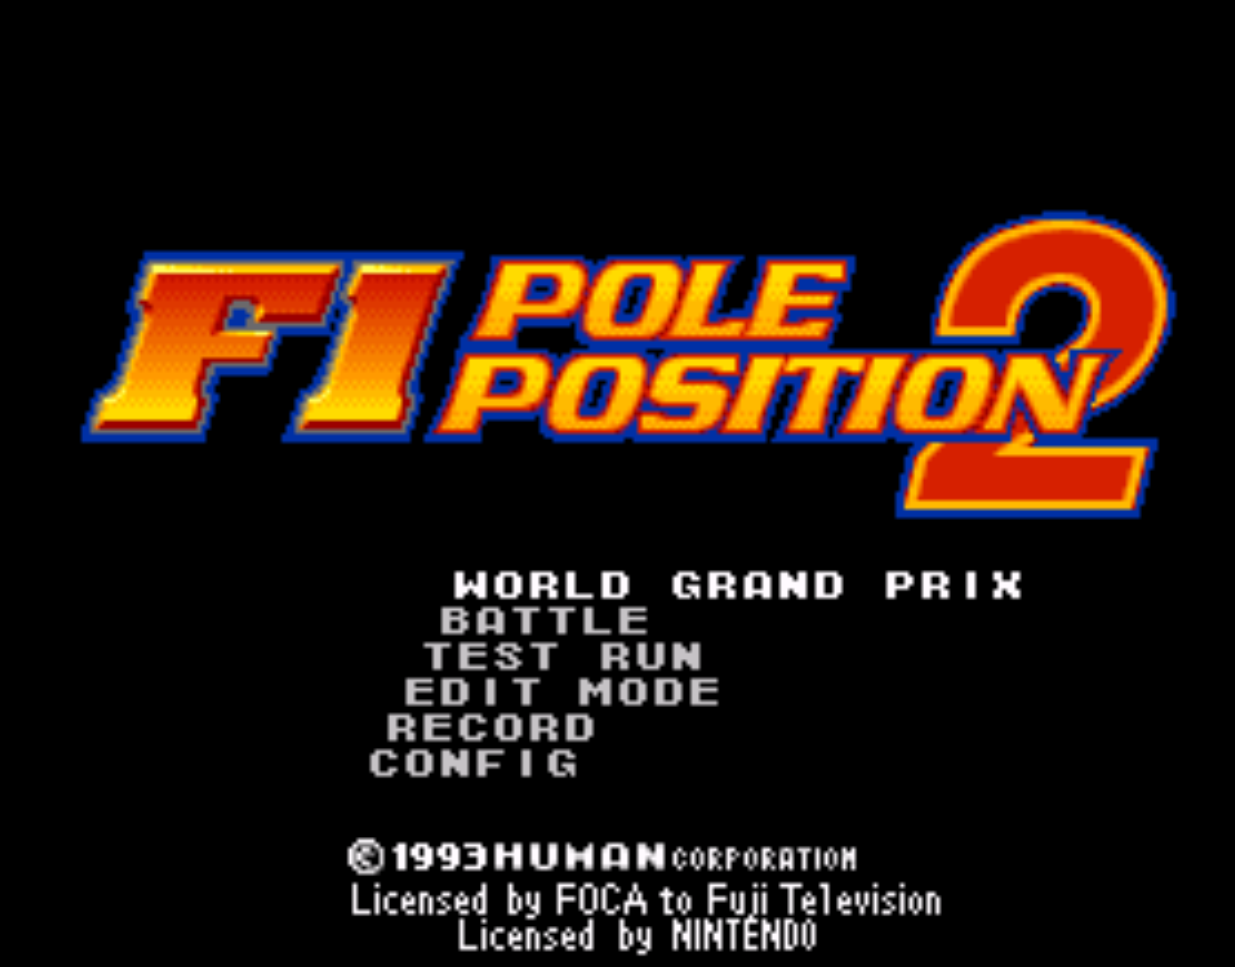 F1 Pole Position 2 Title screen